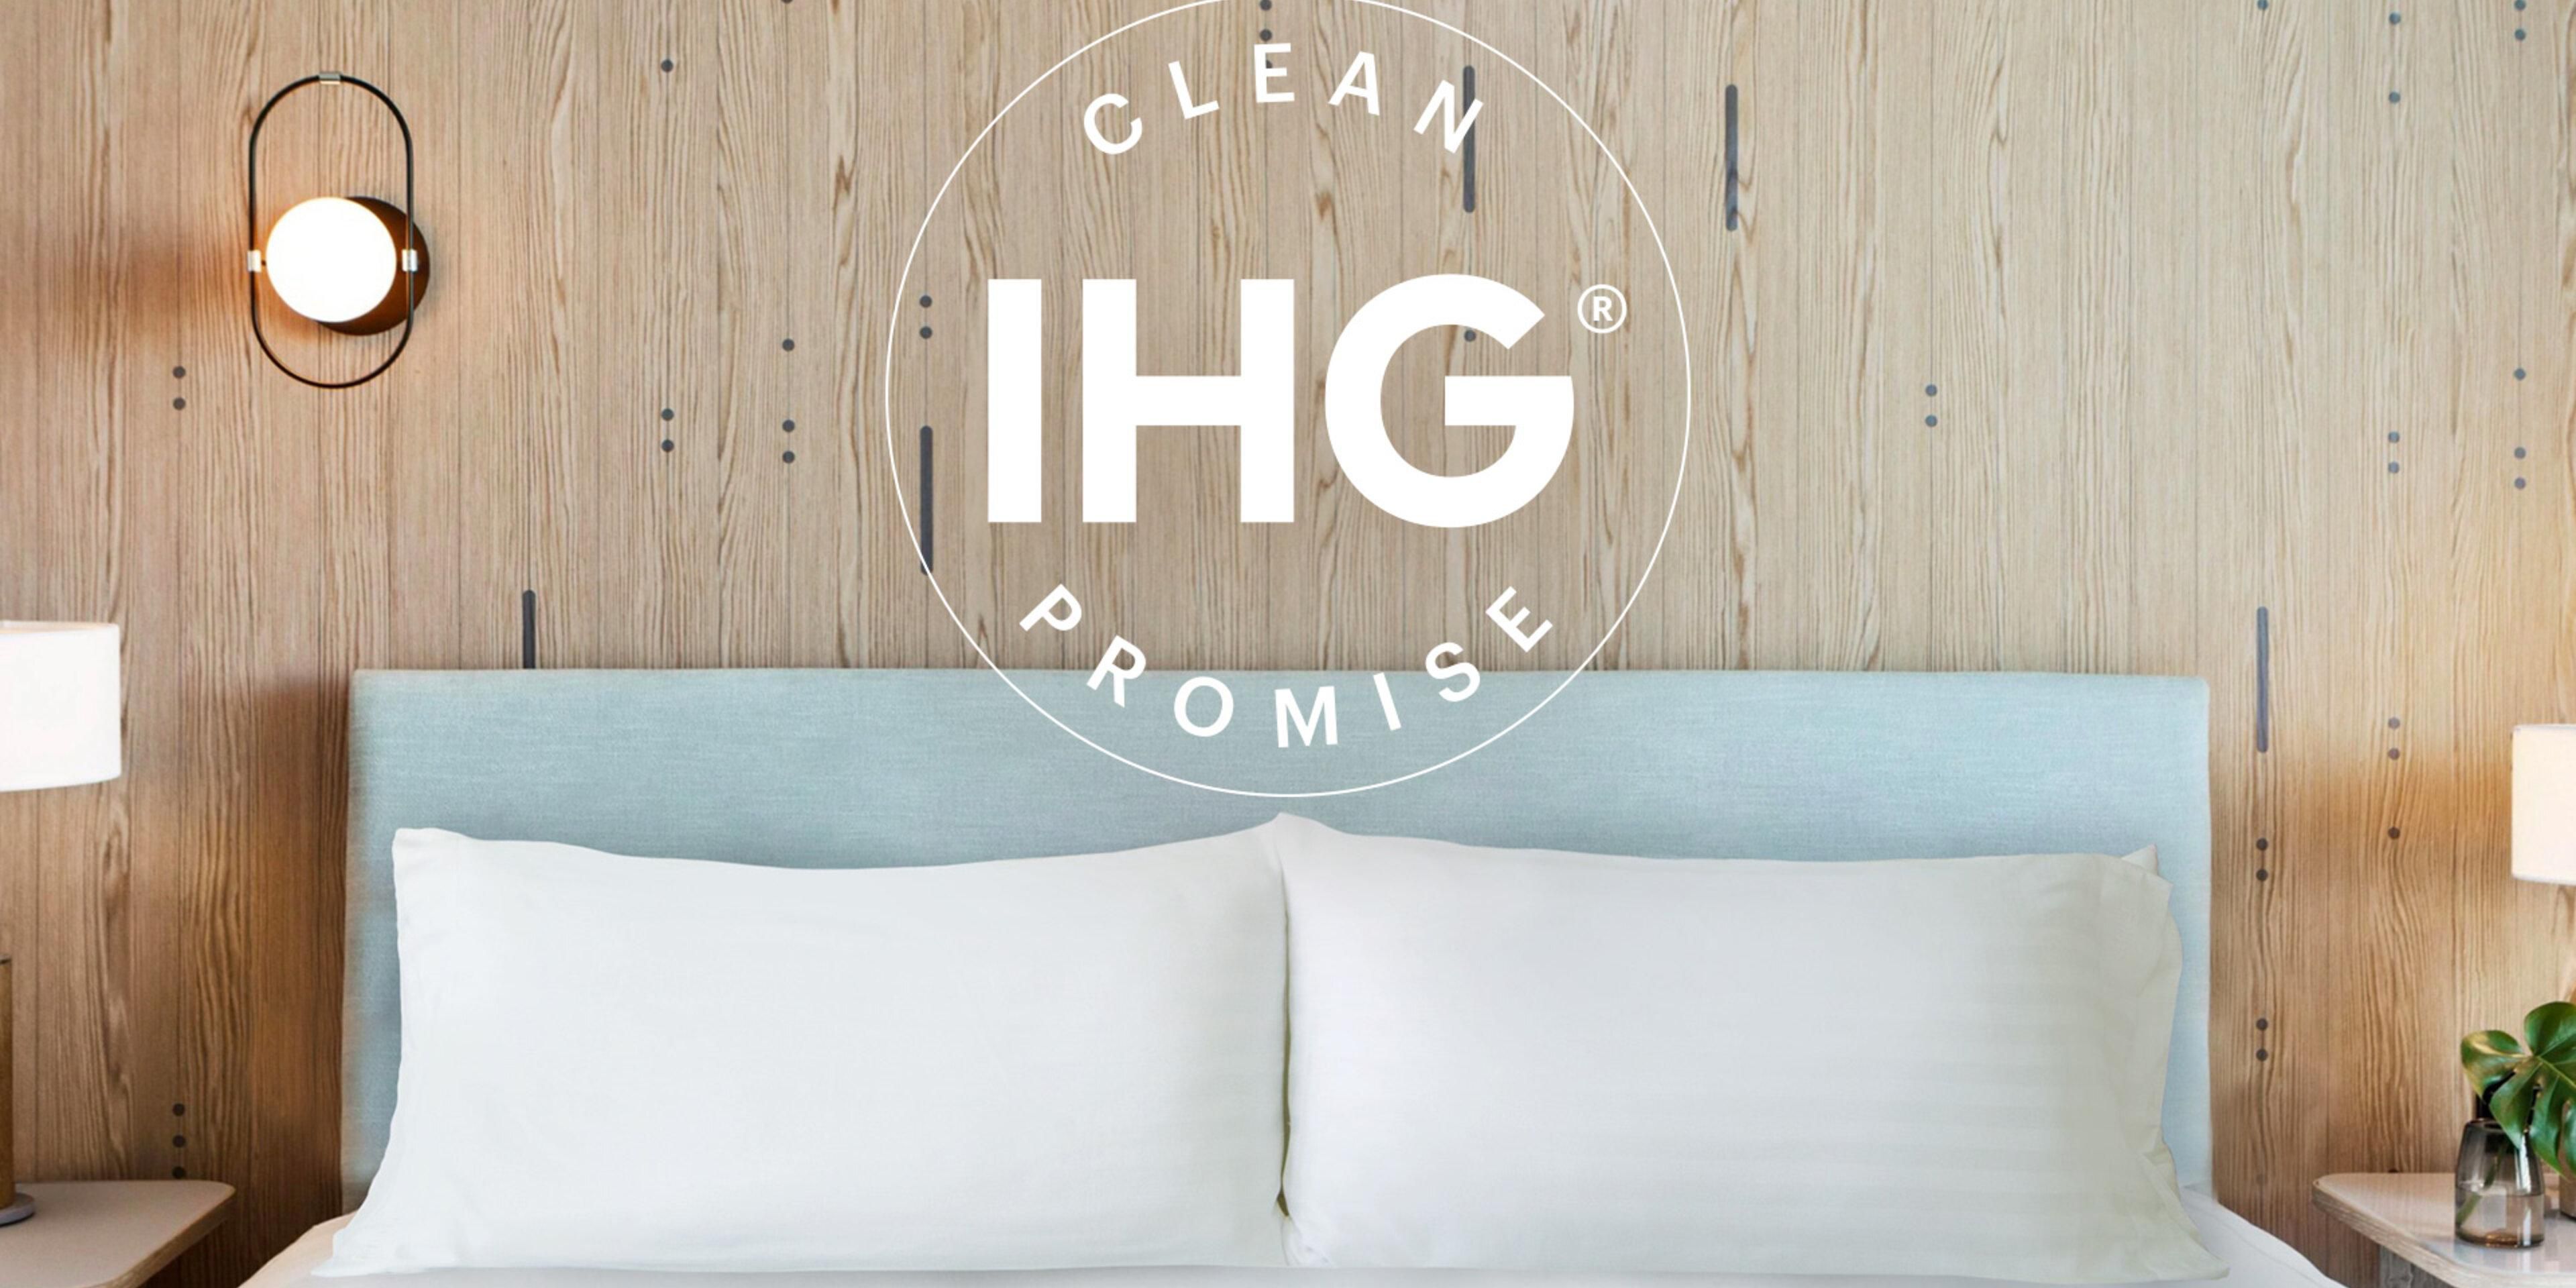 With updated IHG Way of Clean measures in place, guests are reassured that: Good isn’t good enough – we’re committed to high levels of cleanliness. That means clean, well-maintained, clutter-free rooms that meet our standards. If this isn’t what you find when you check in then we promise to make it right.